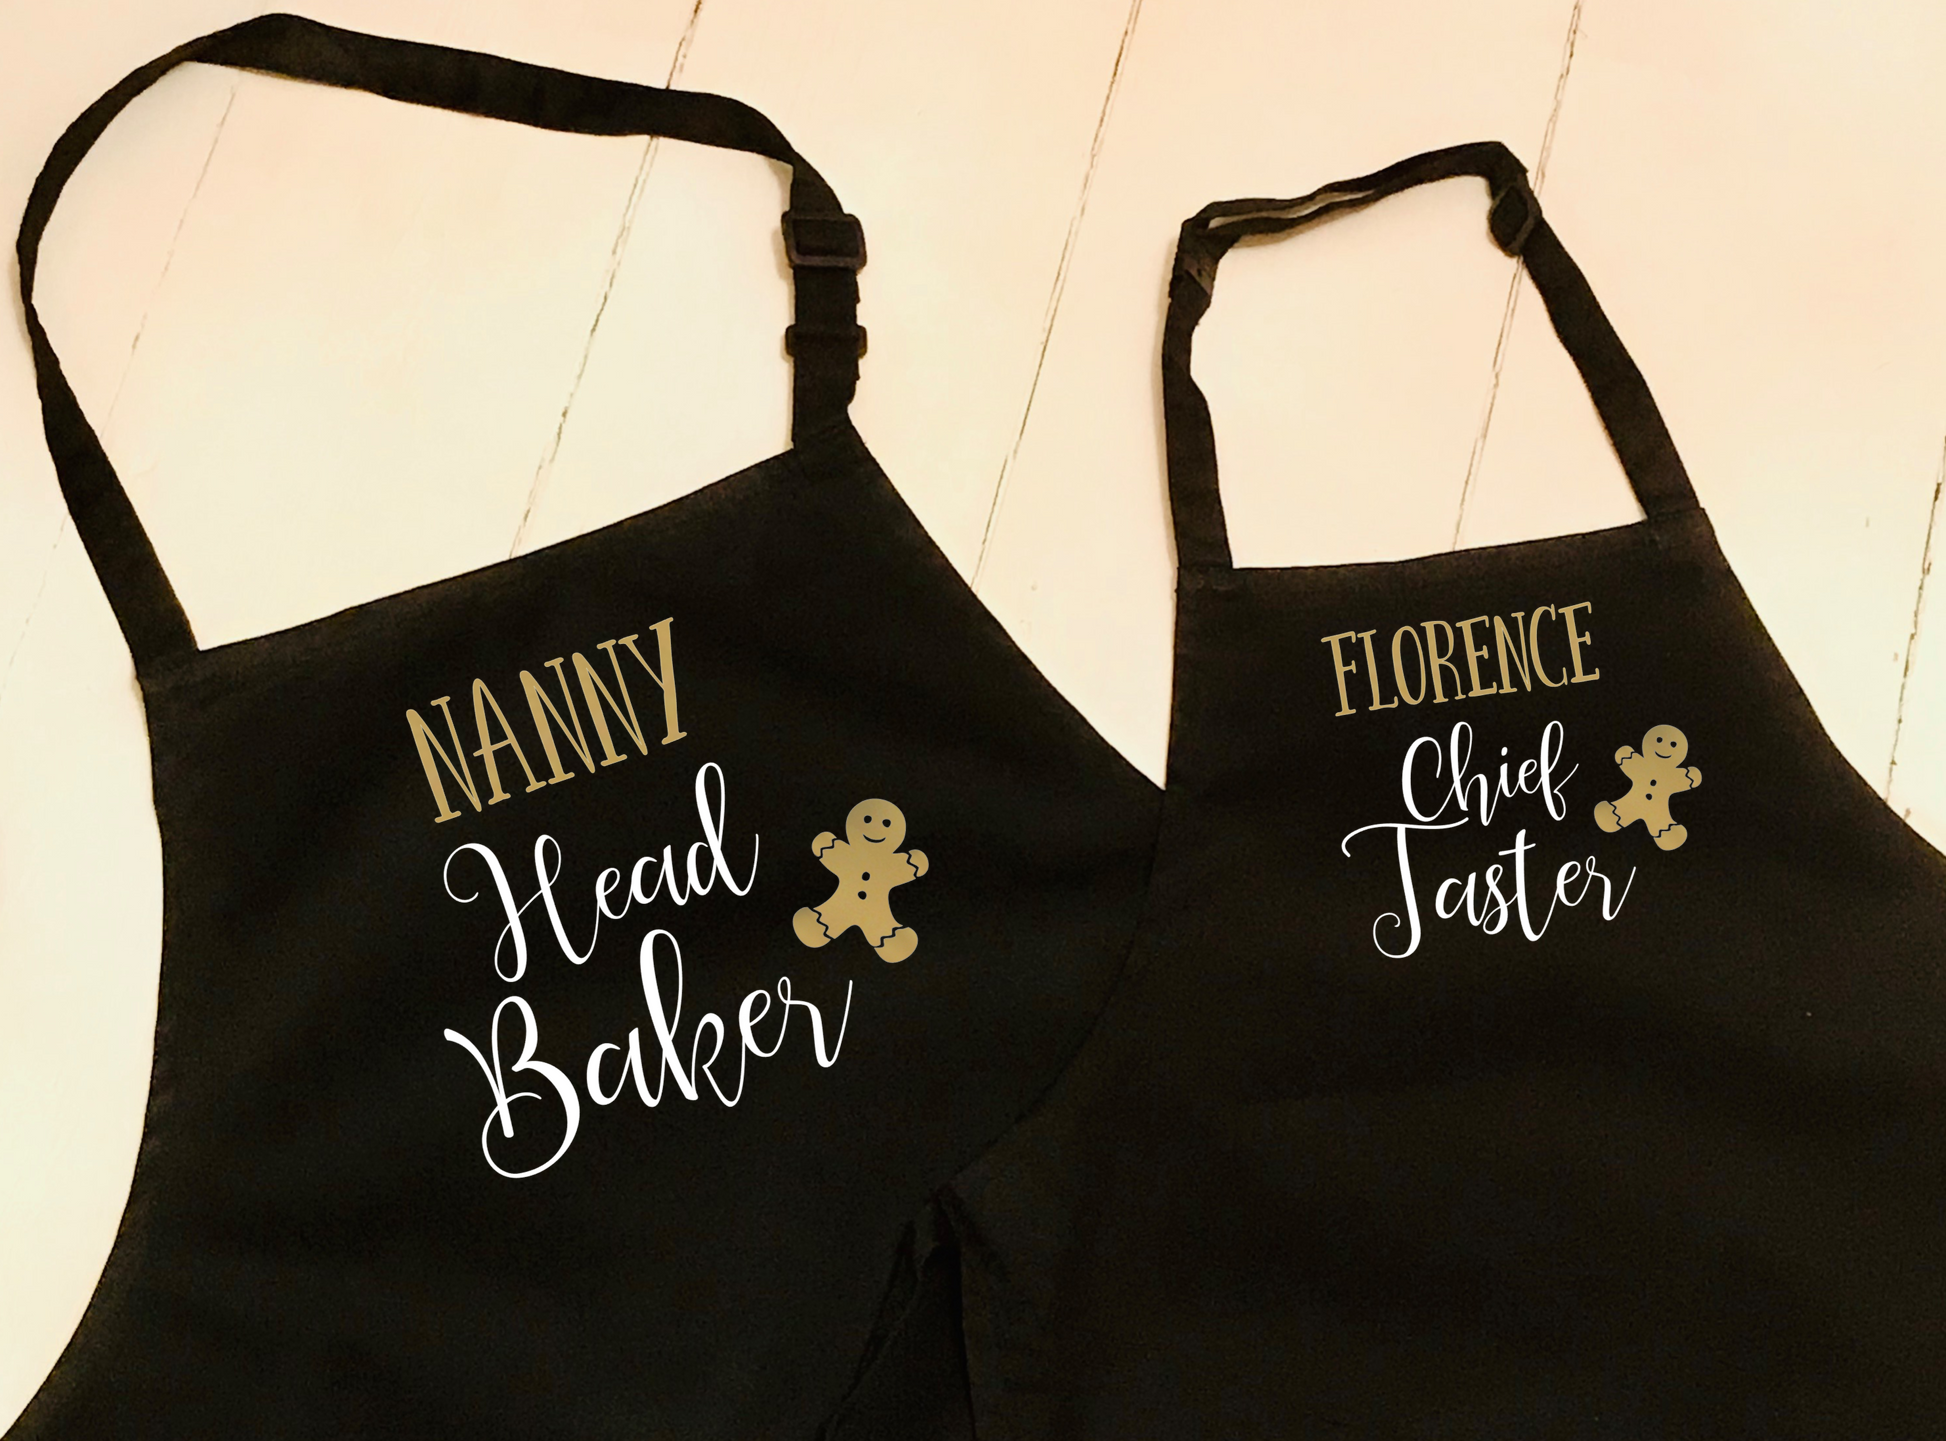 set of two black aprons, one printed with Head Baker, and the other Chief Taster. Can be personalised with names. A Gingerbread man also features in the design